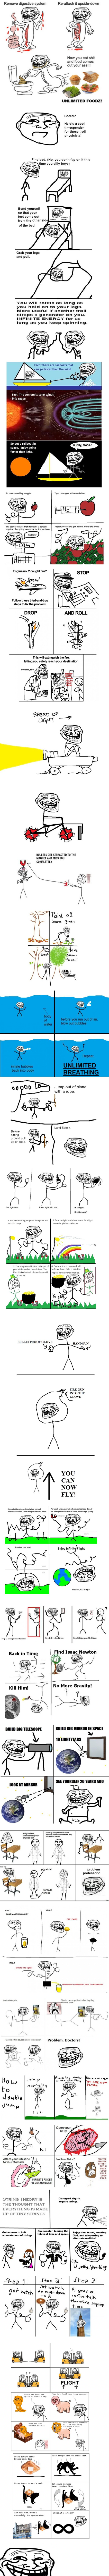 Troll Science. trolololol.. i loves these. More comp pl0x